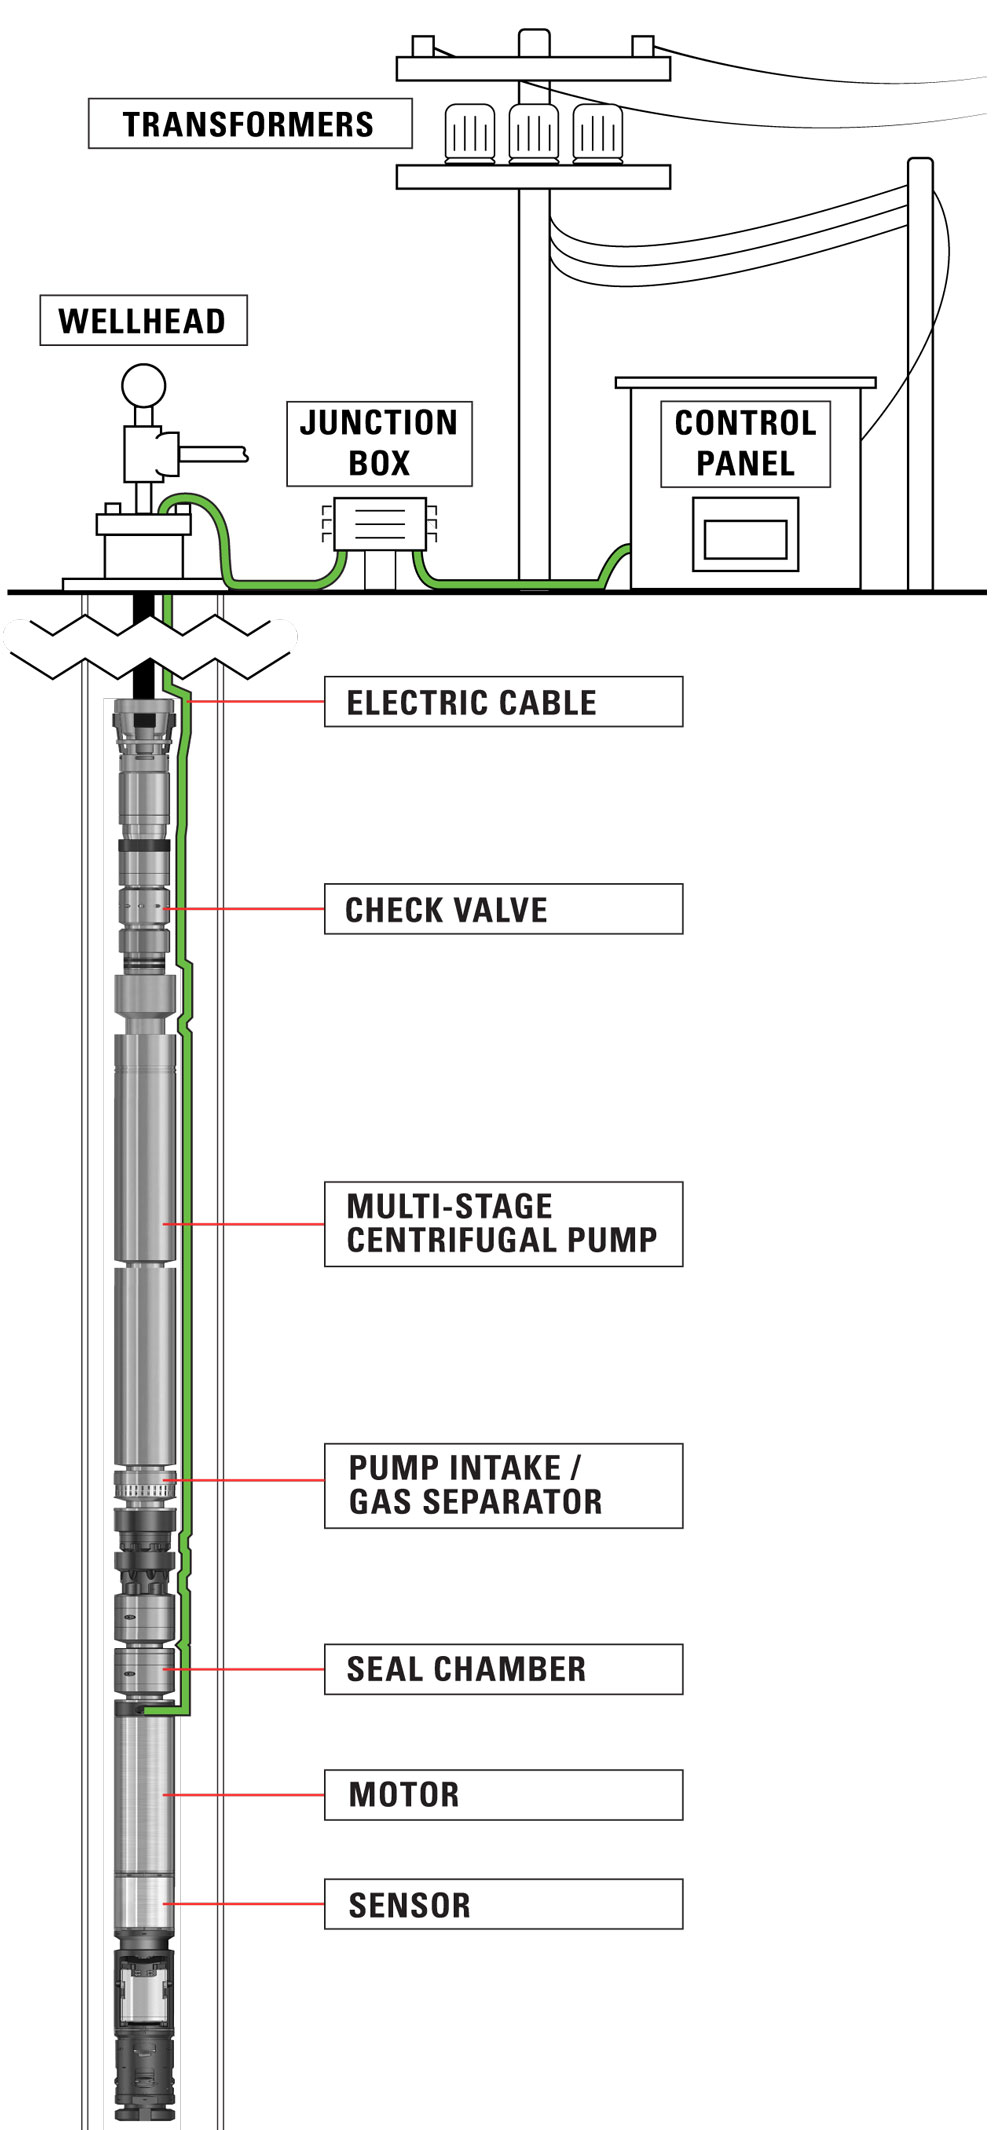 Basic elements of the Electric Submersible Pump From Clegg J 1993   Download Scientific Diagram